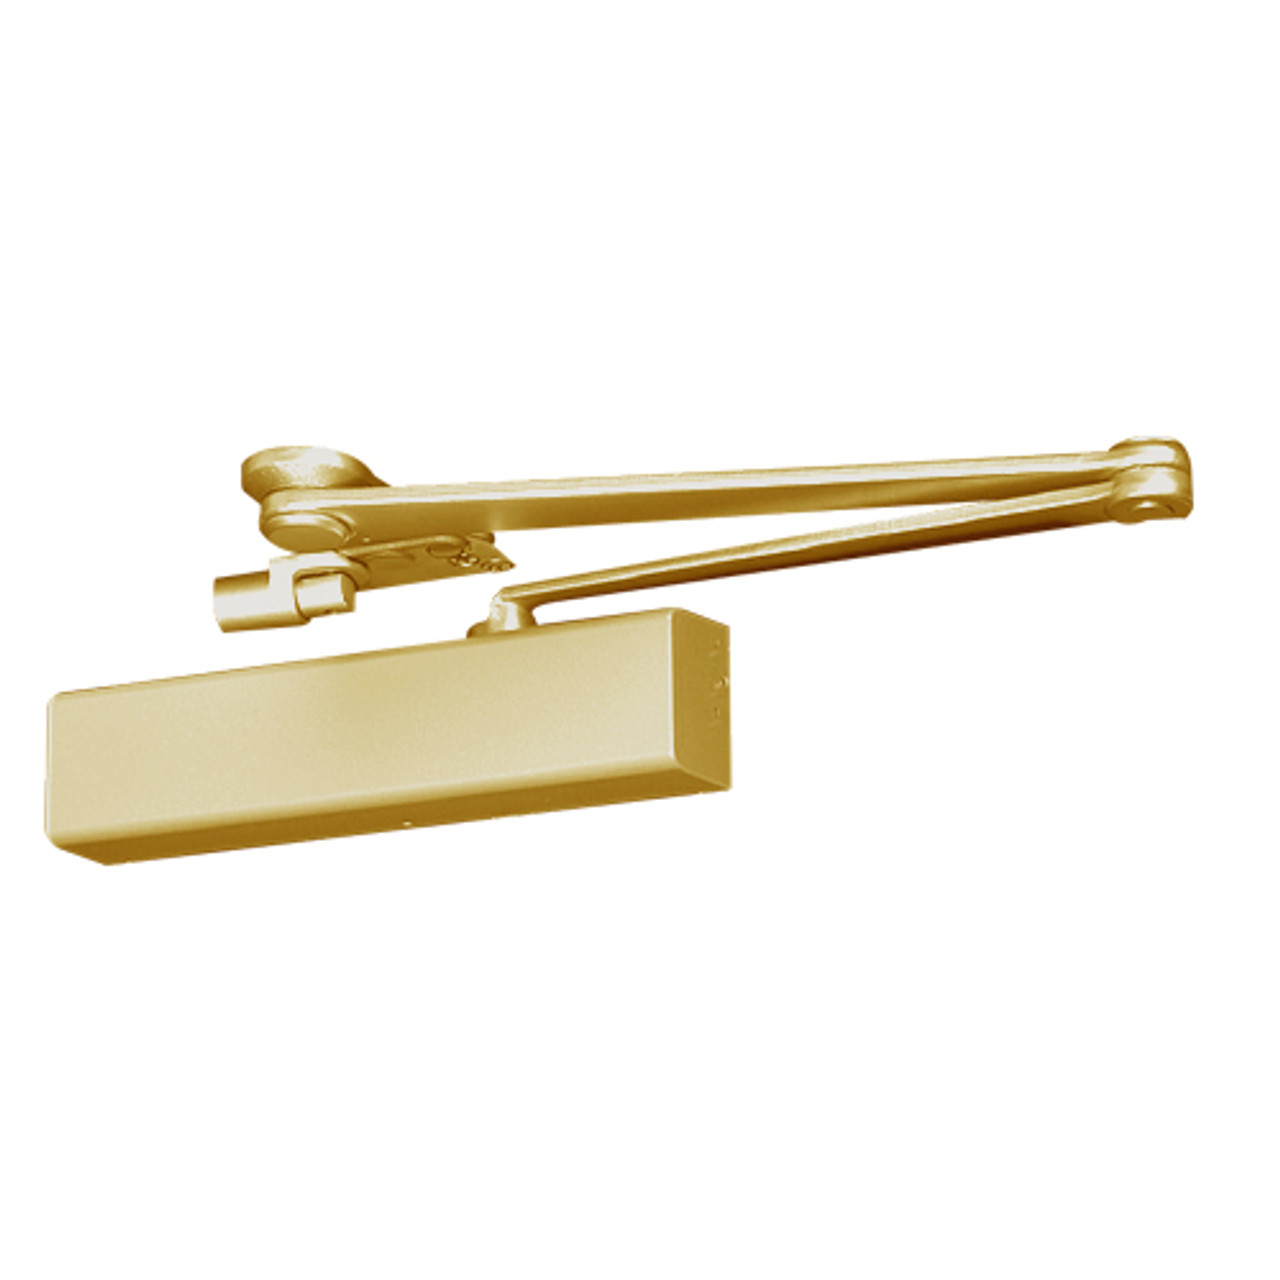 CPS8501A-696 Norton 8000 Series Full Cover Non-Hold Open Door Closers with CloserPlus Spring Arm in Gold Finish